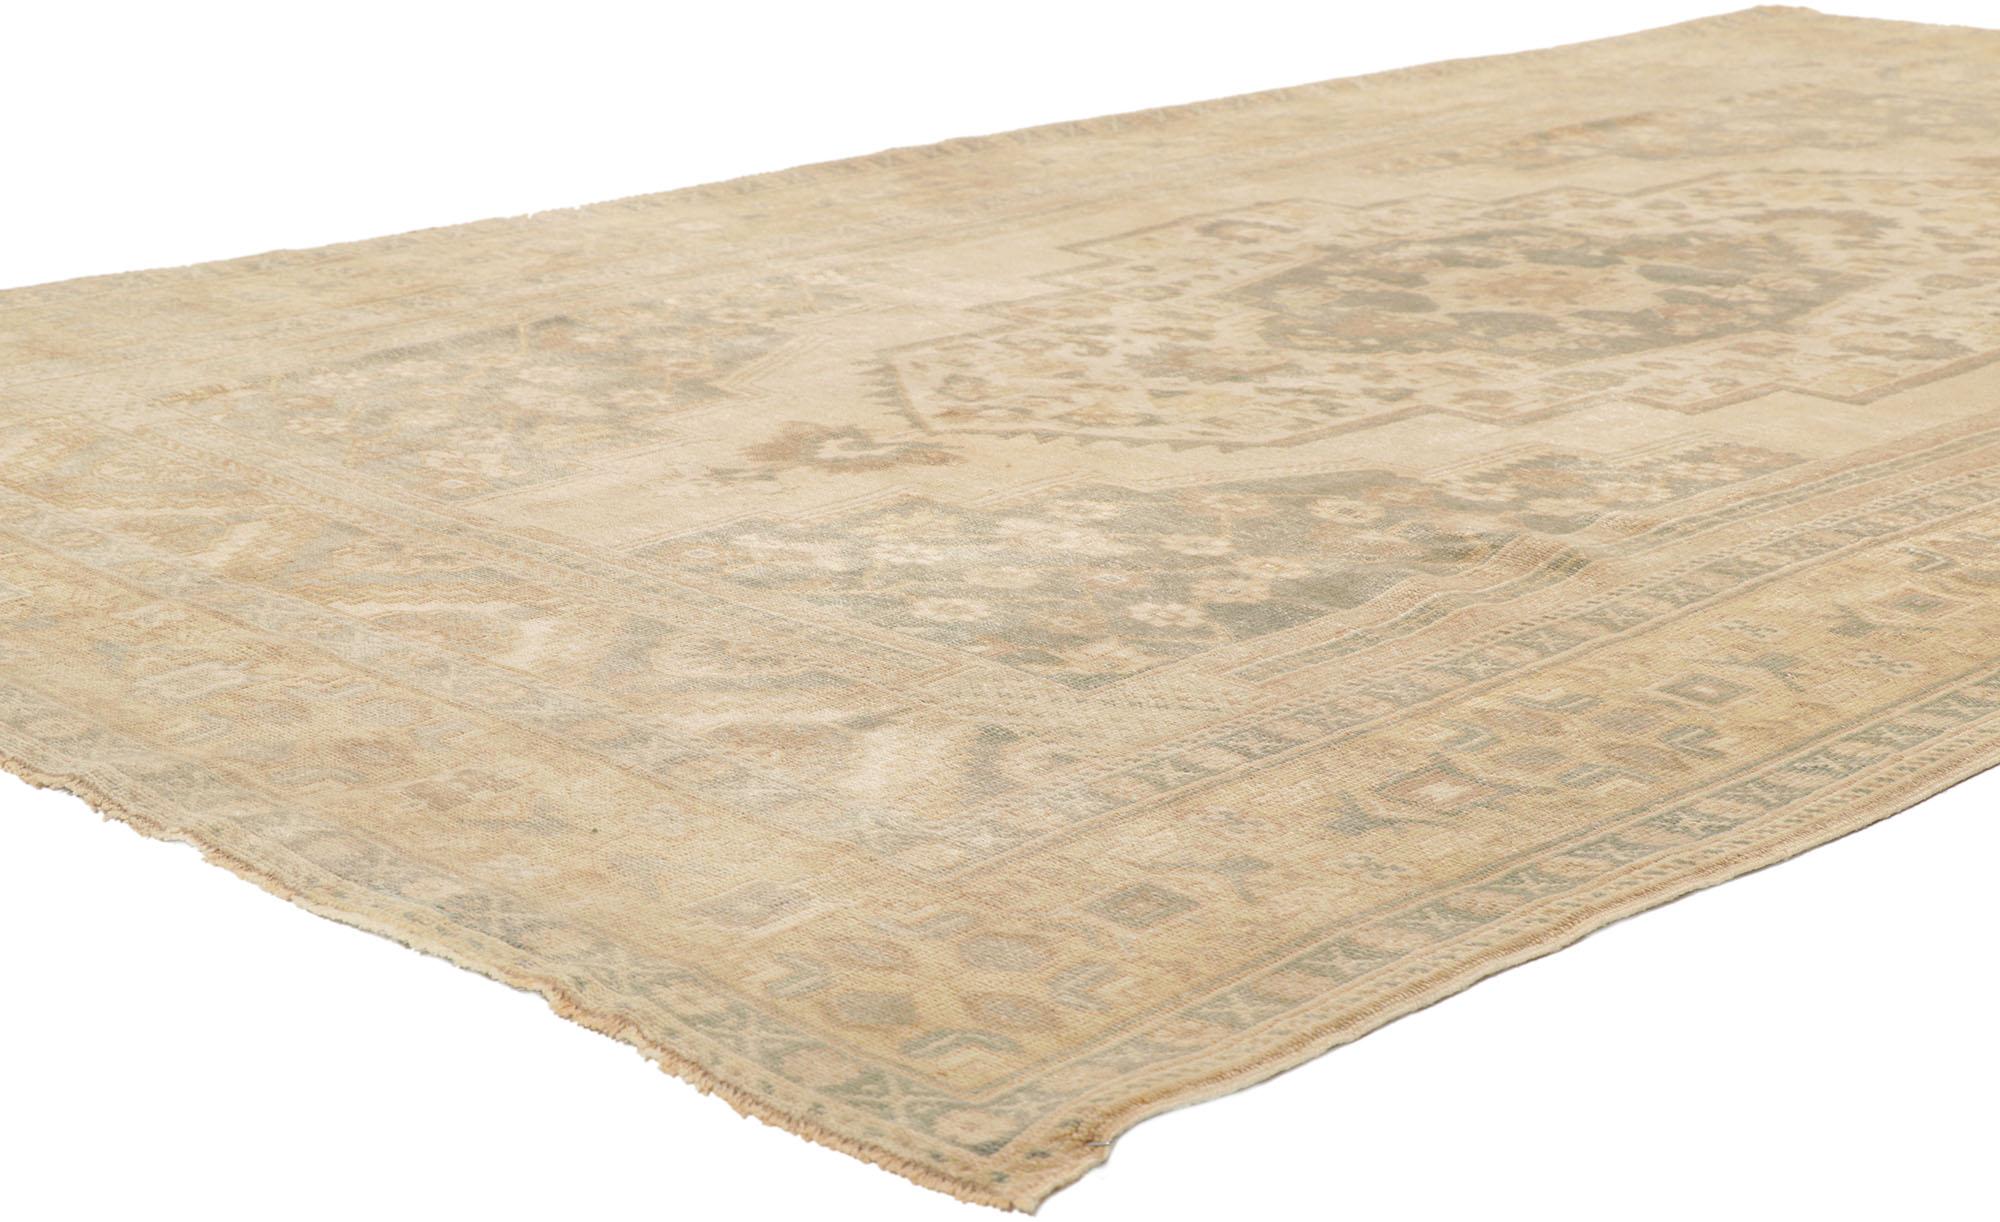 53687 Vintage Turkish Oushak rug 5'08 x 9'07. Showcasing effortless beauty and soft, bespoke vibes, this hand knotted wool vintage Turkish Oushak rug beautifully embodies romantic cottage style. The antique washed field features a central medallion